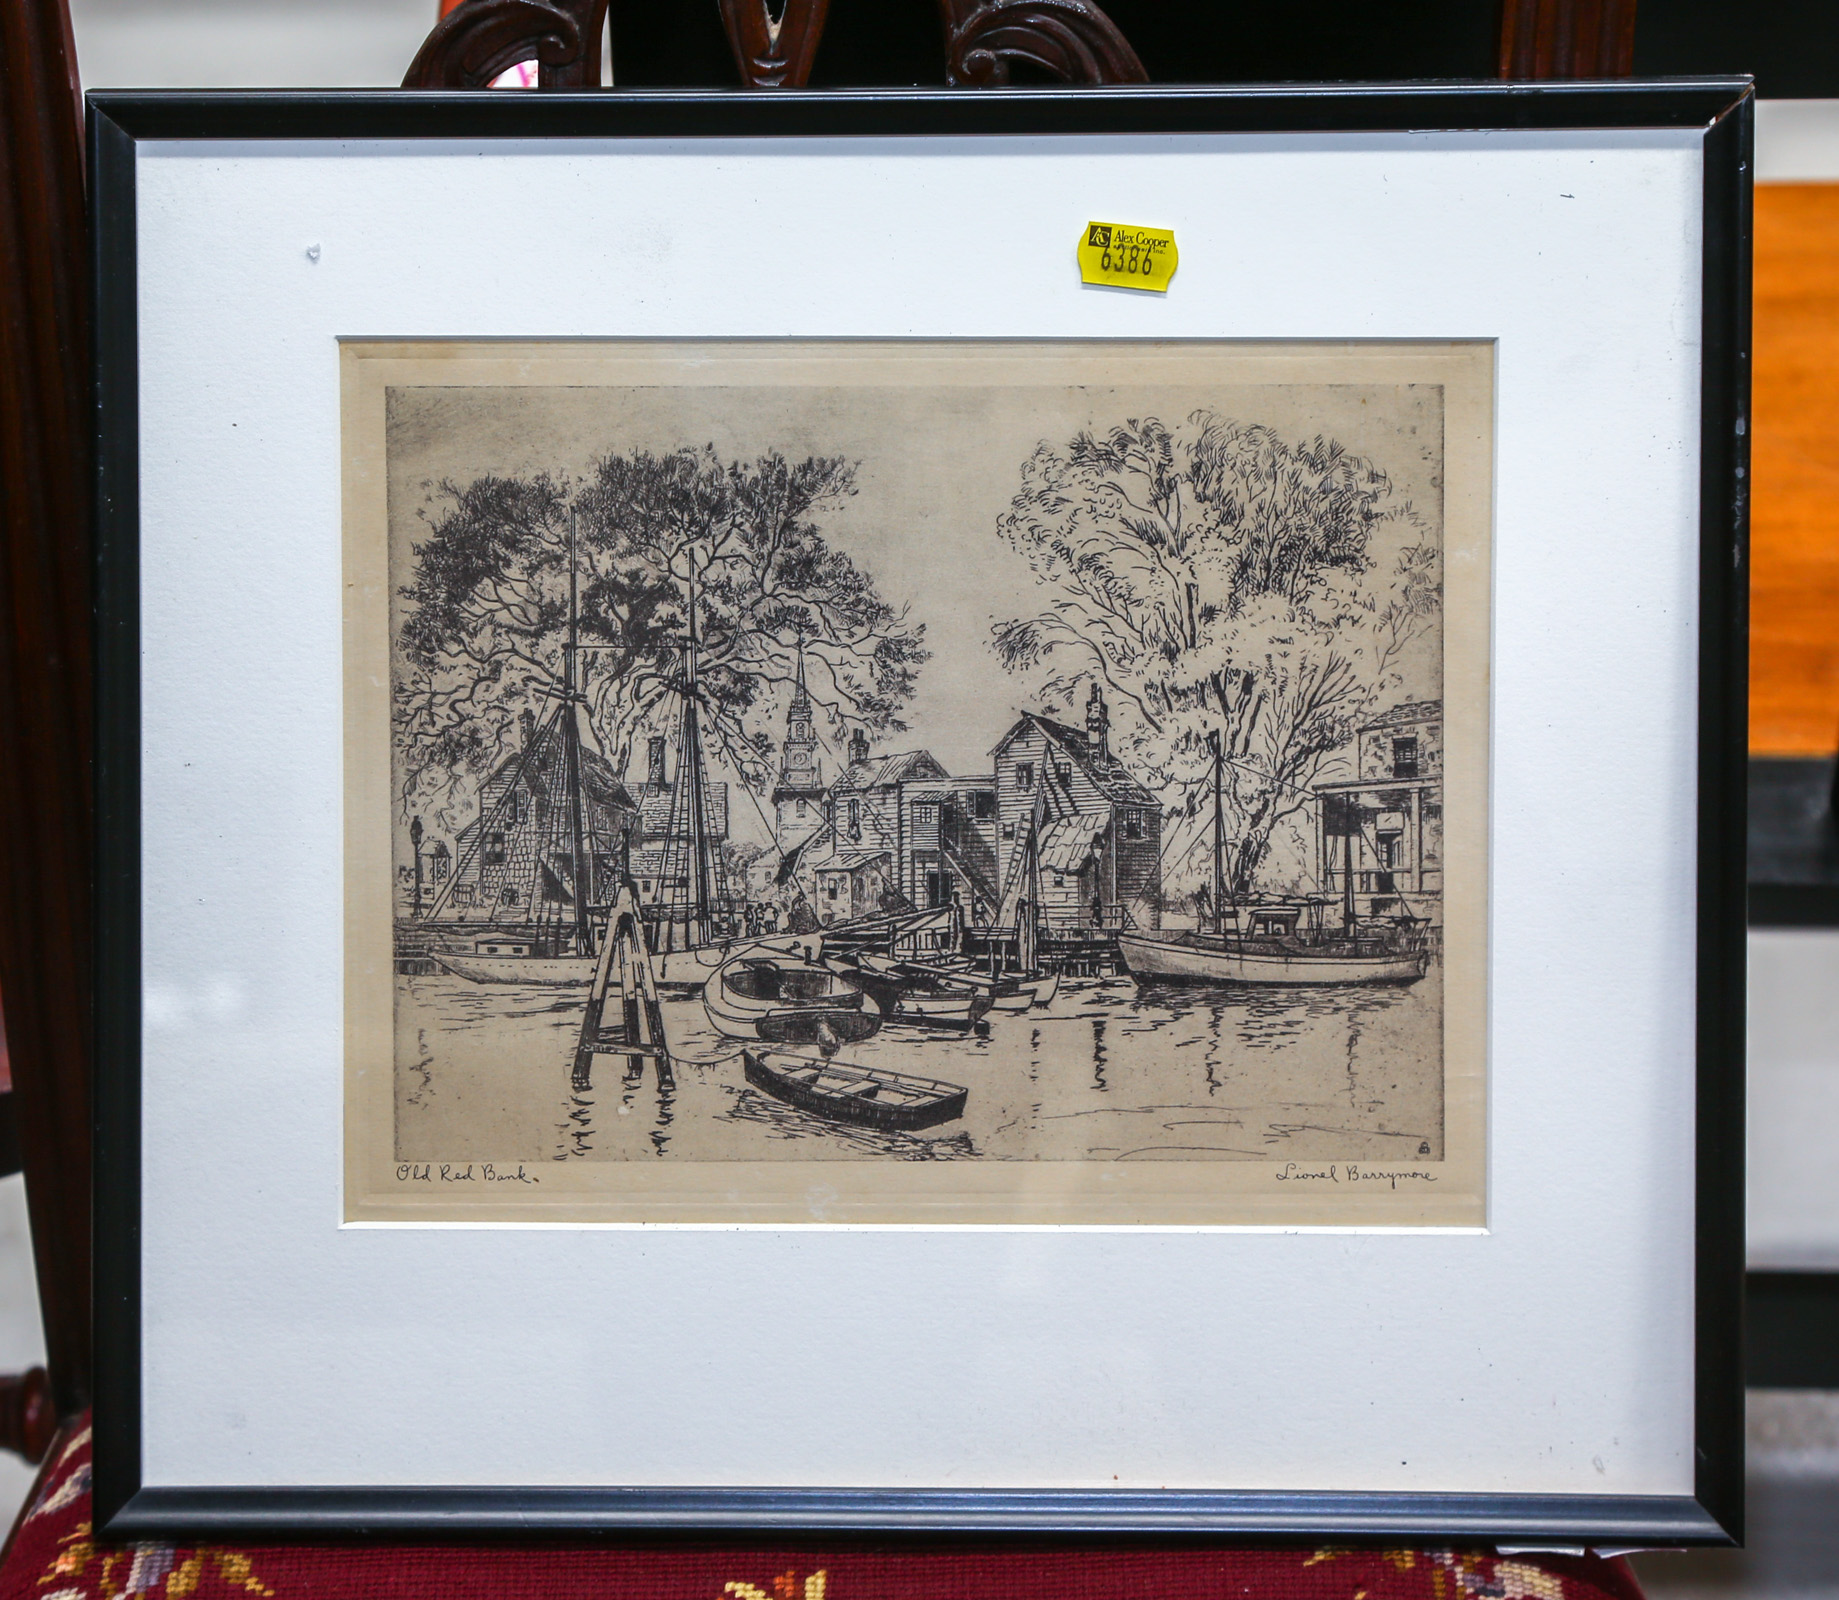 FRAMED PRINT OF WHARF AFTER LIONEL 2e9340